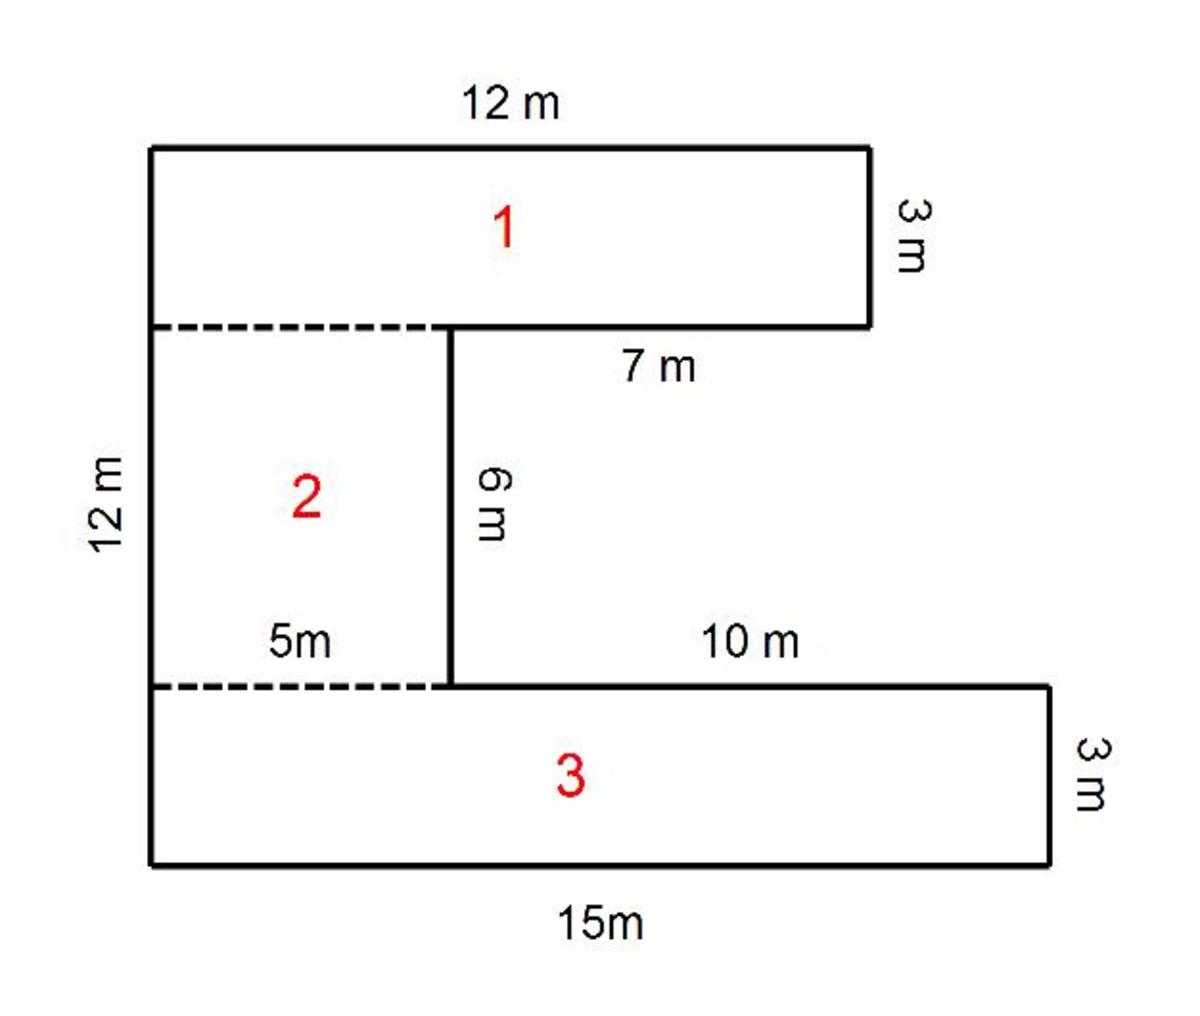 compound-c-shapes-how-to-calculate-the-perimeter-and-area-of-a-c-shape